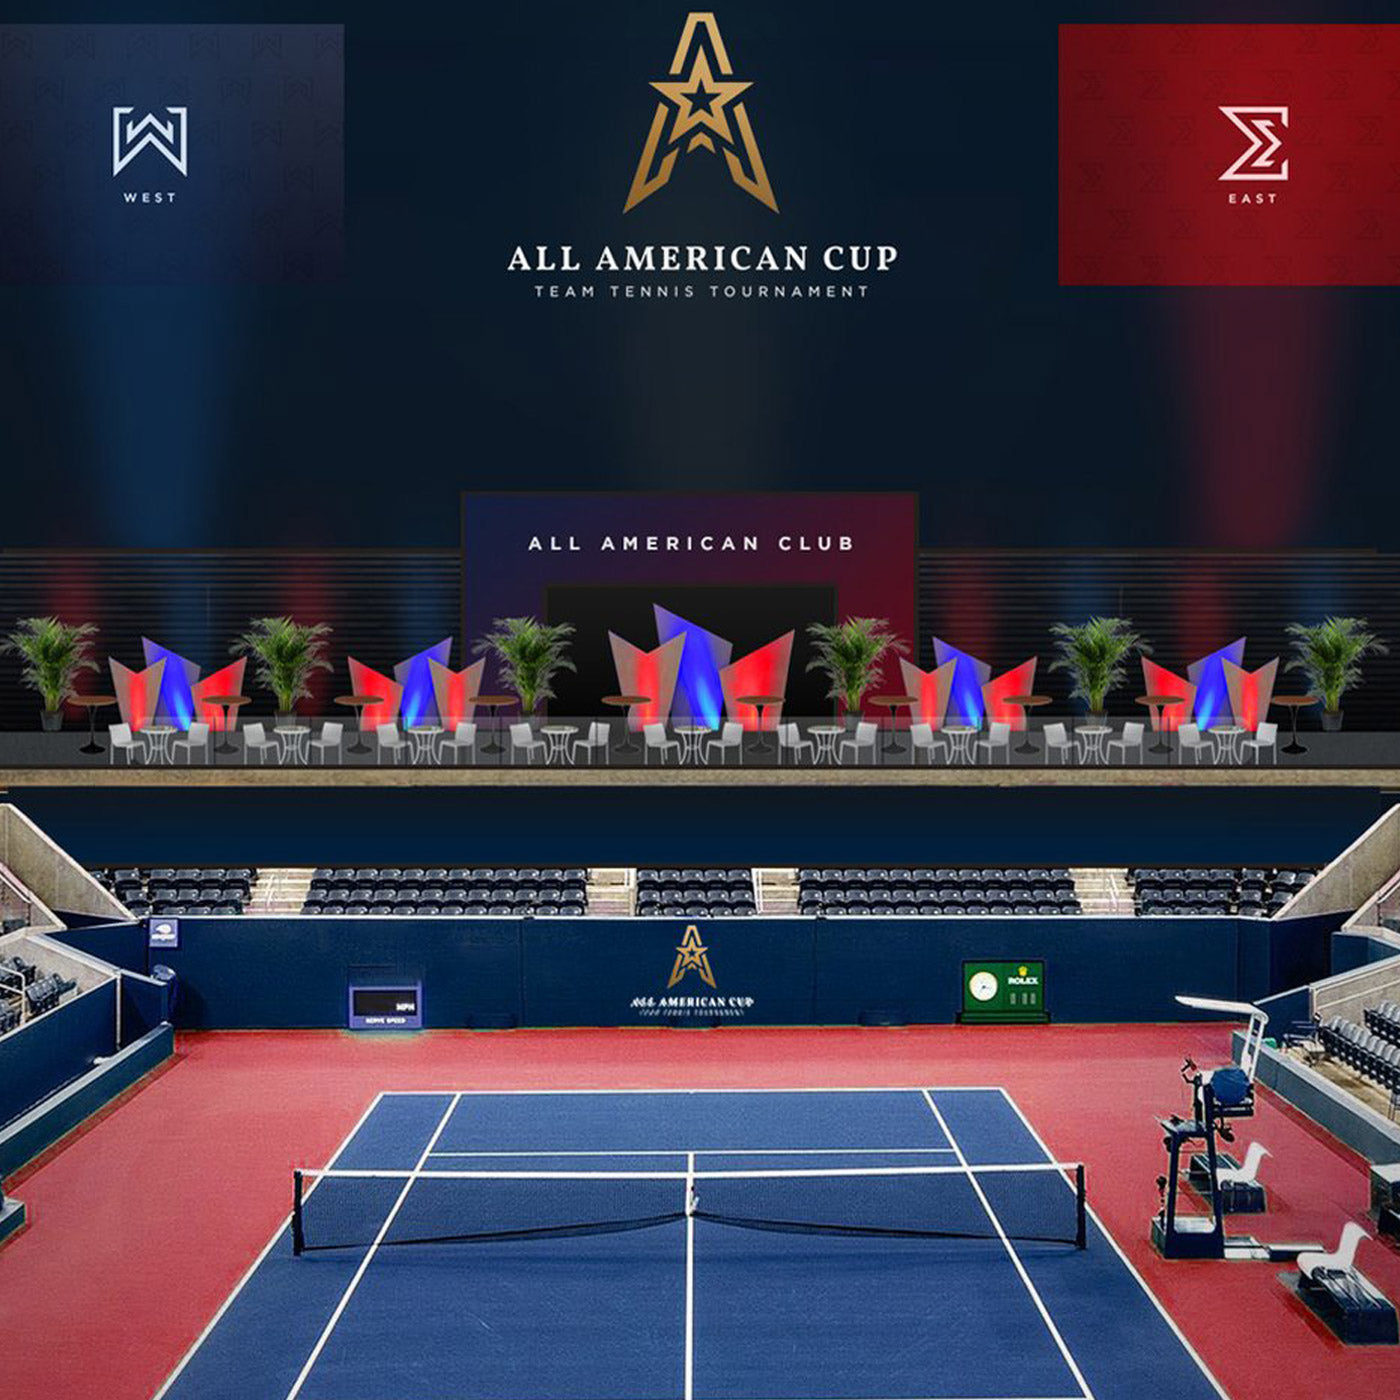 All American Cup Event